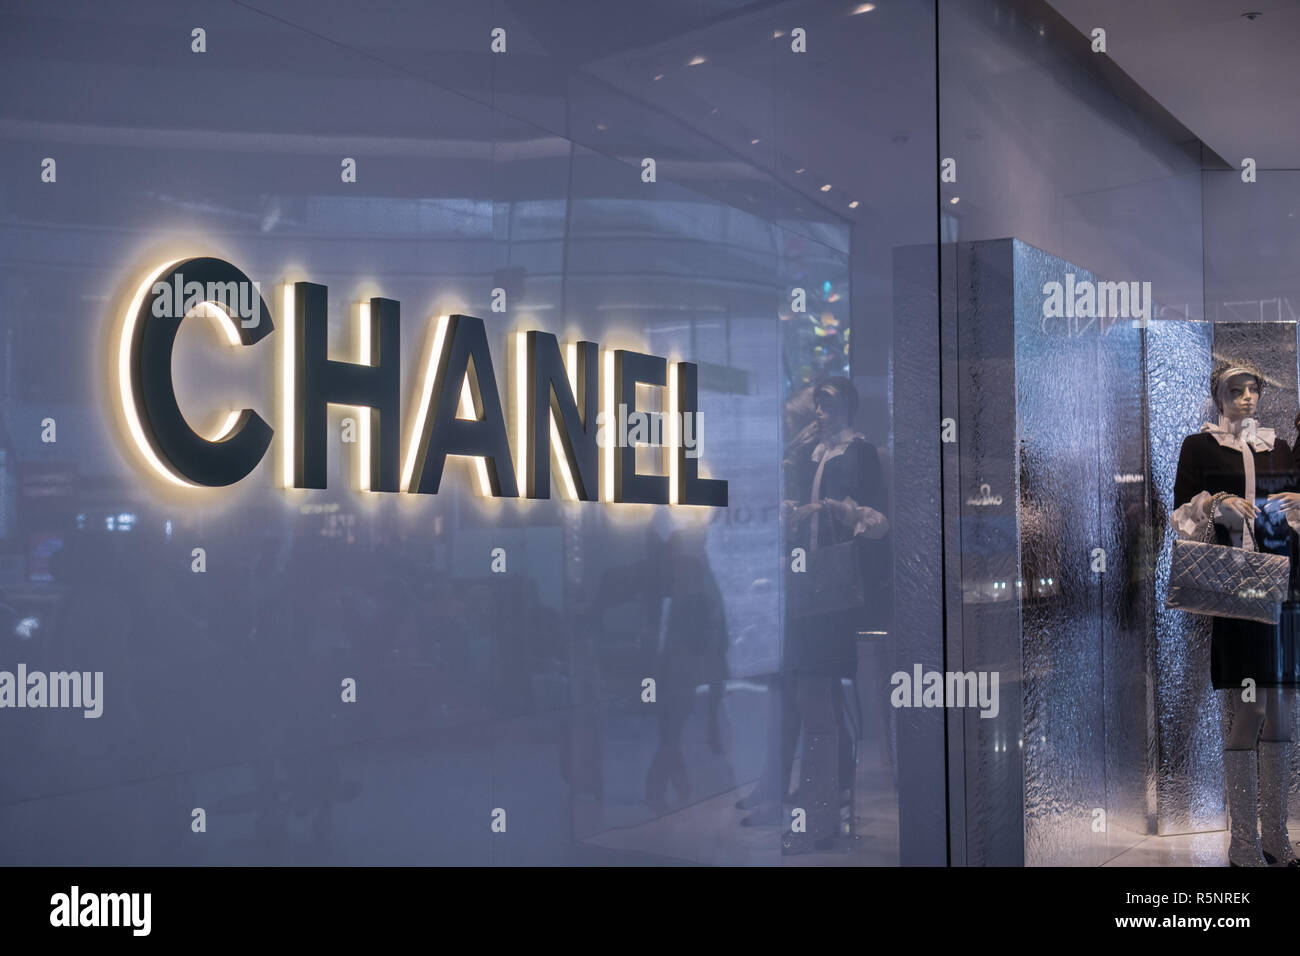 September 24, 2017 London/UK - Chanel logo at the store entrance at Heathrow airport Stock Photo